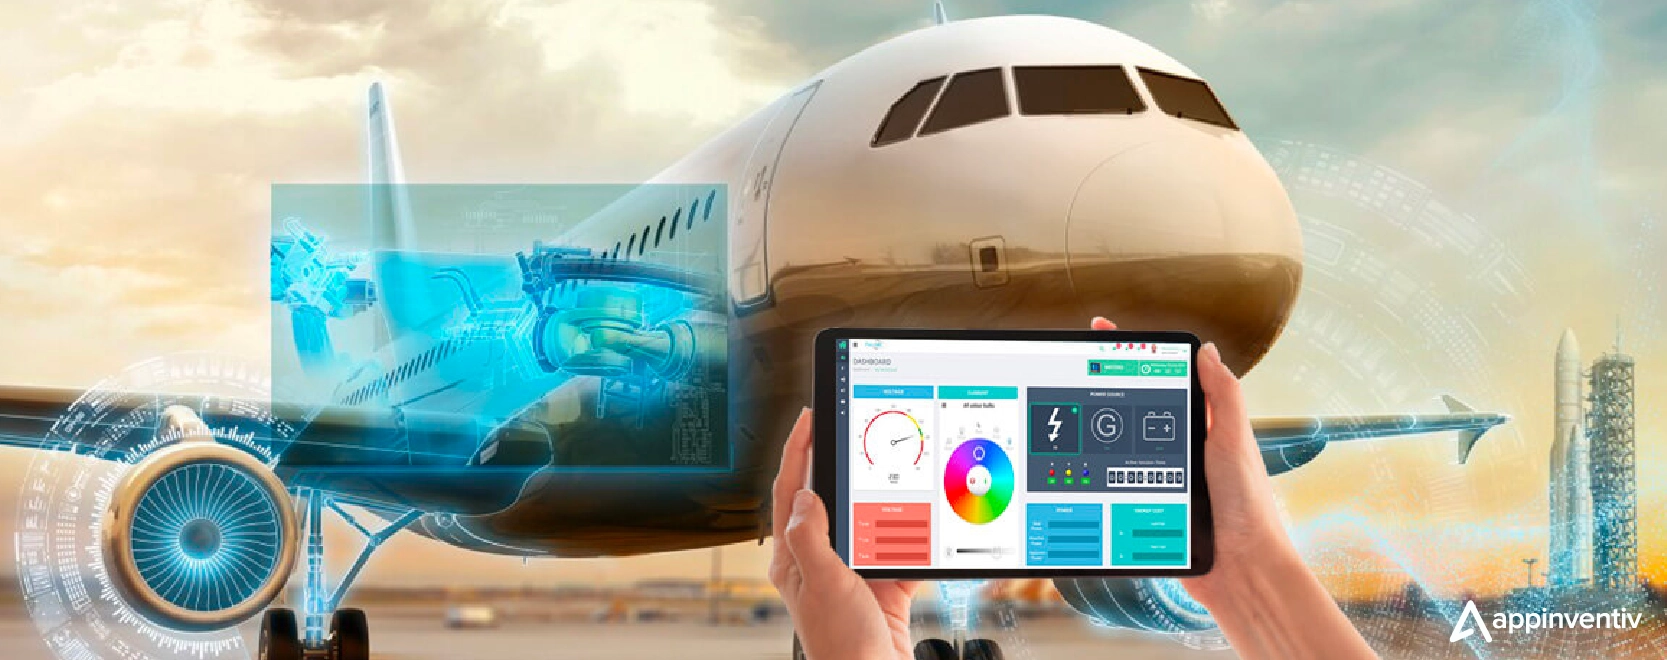 Use Cases of IoT in aviation